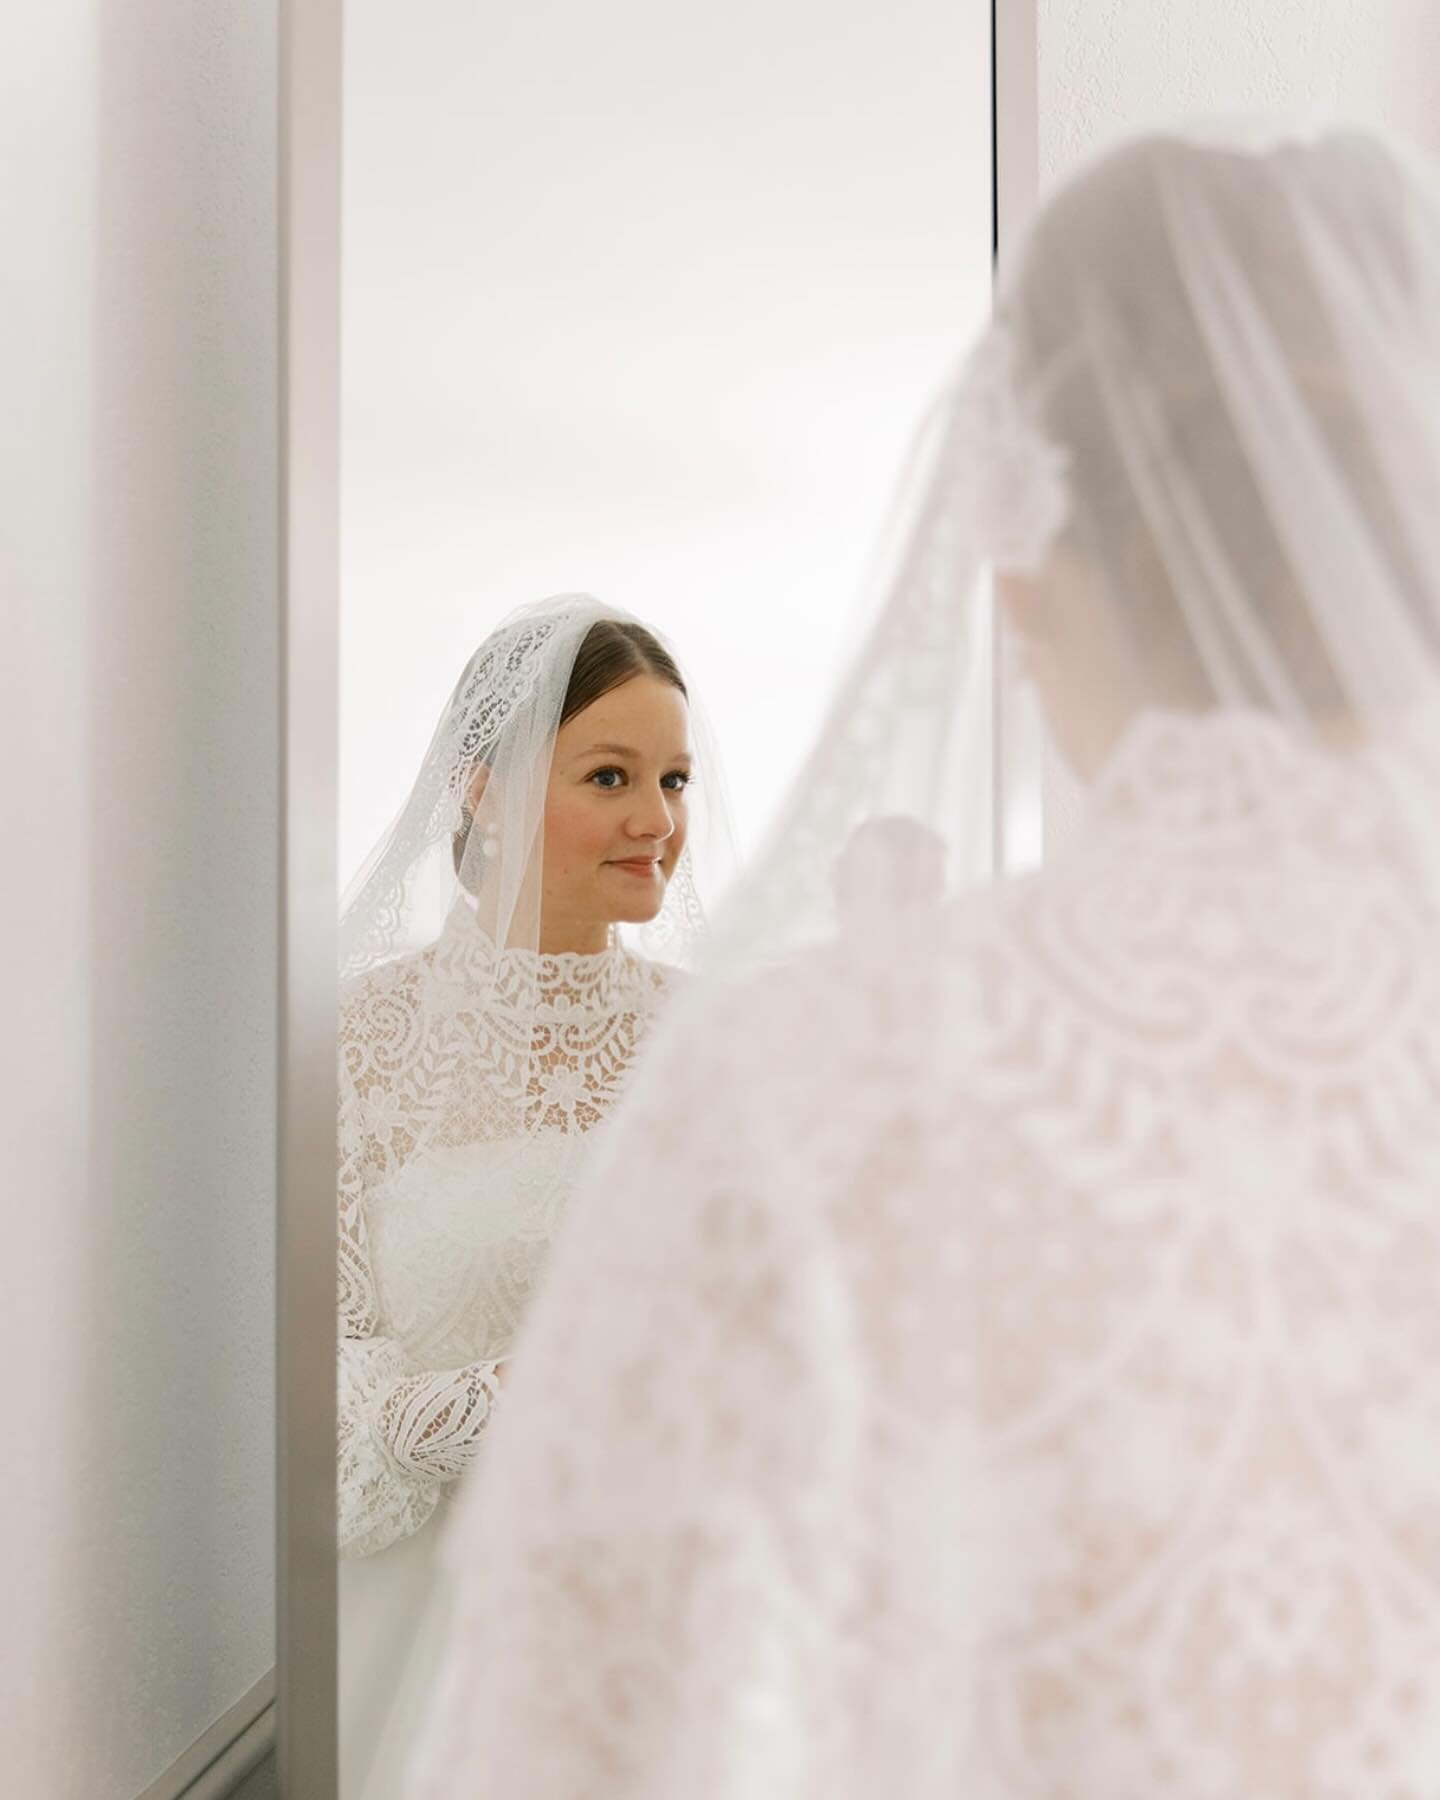 Moments before becoming Mrs ✨

Photography: @jillianadrianne
Coordination: @canaweddingco
Florals: @arrowbellaweddings
Venue: @annapolis_weddings
Church: St Mary&rsquo;s Parish
Band: @mltrsband
Cake: @sweetheartspatisserie
Draping: @eventdynamicsinc
